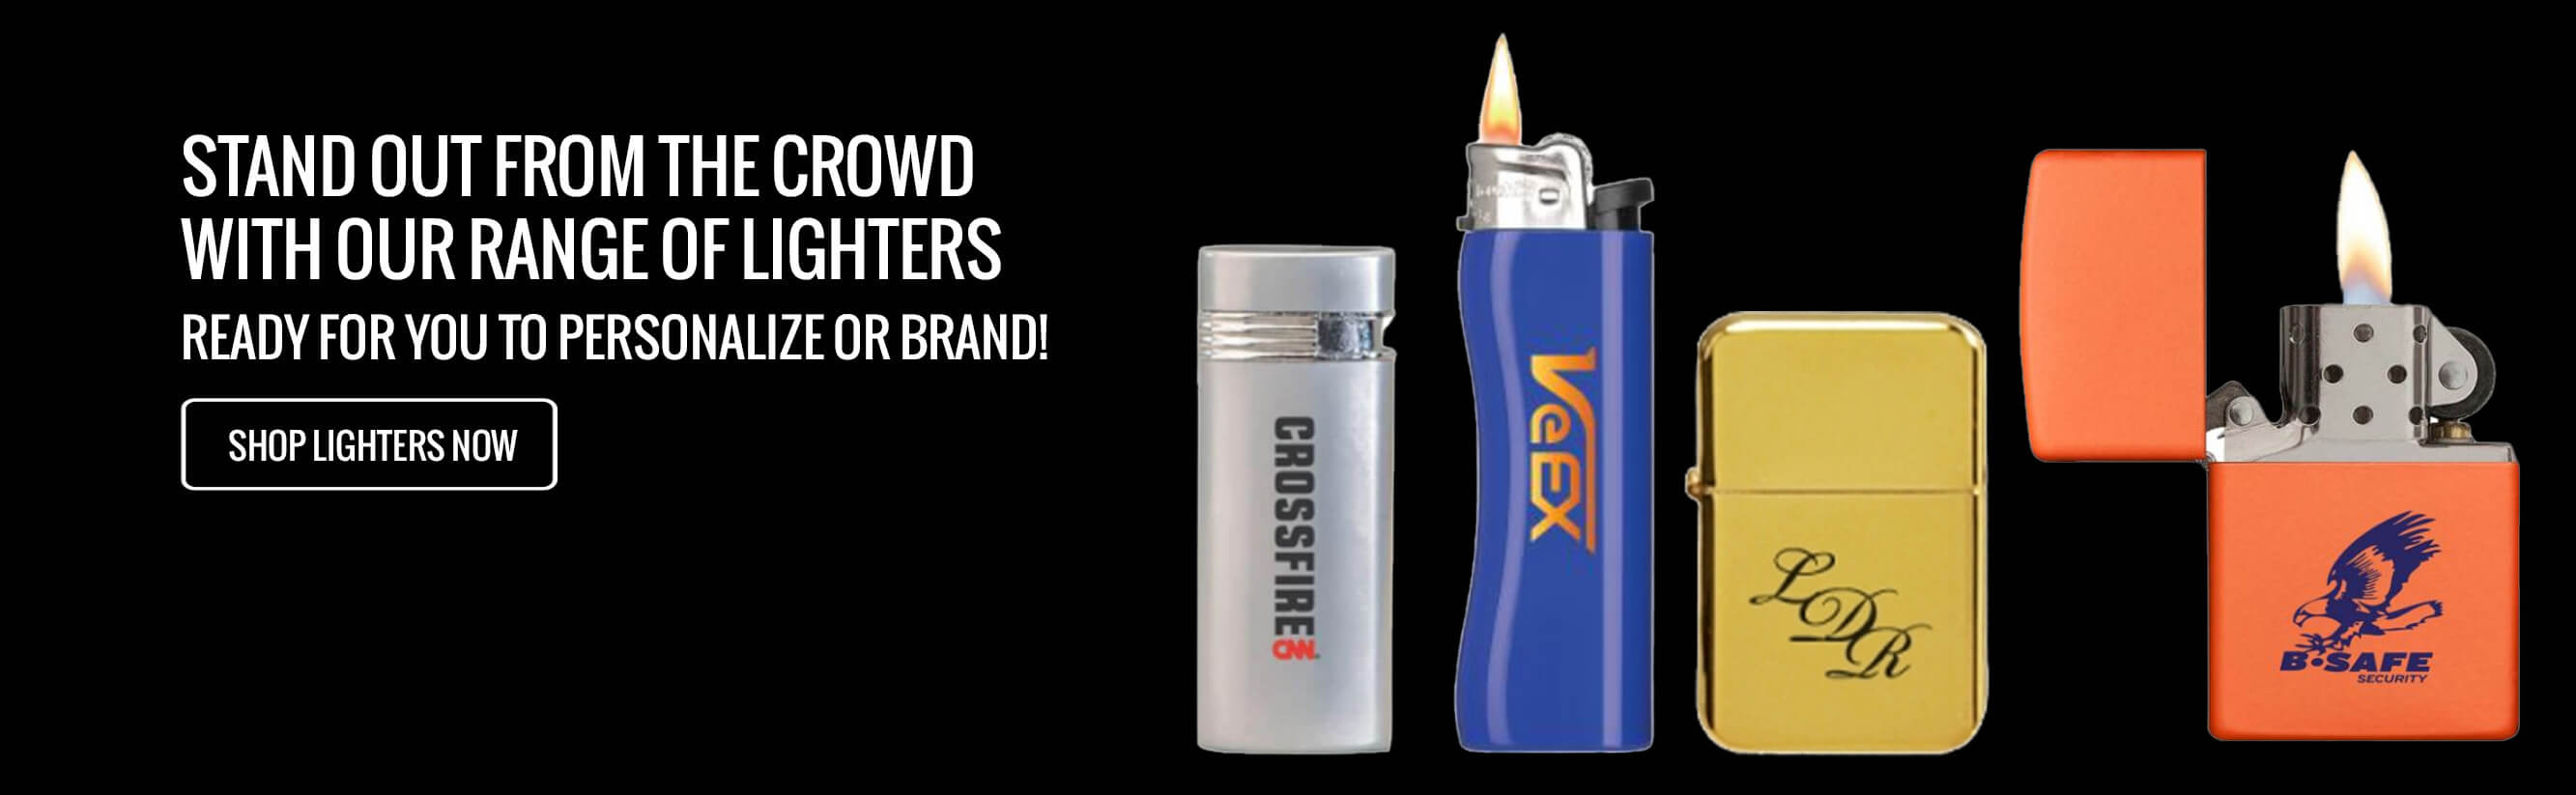 Corporate gifts and advertising specialties from rushIMPRINT Canada